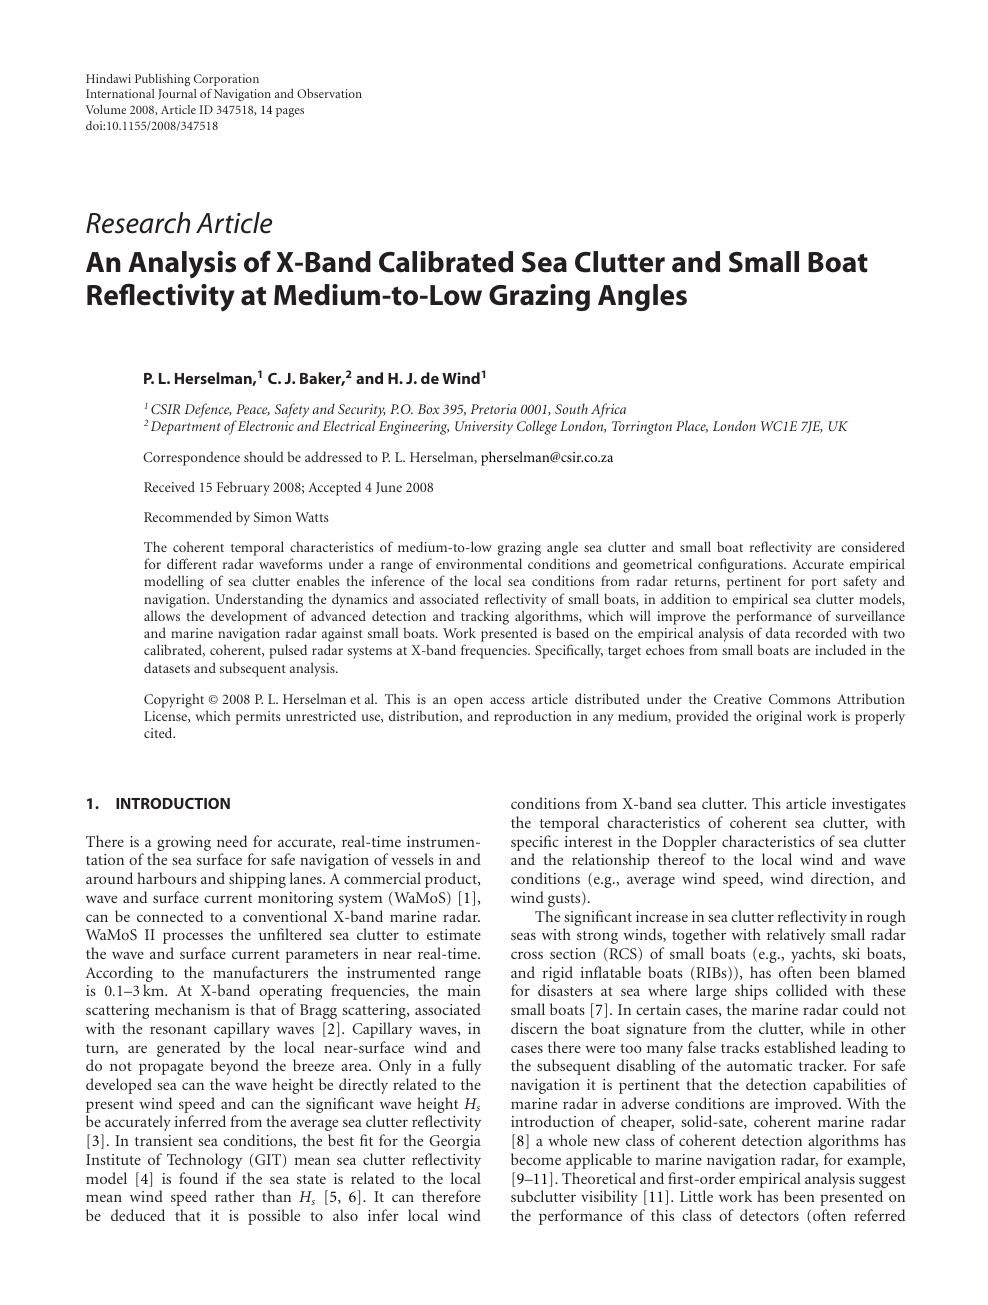 An Analysis Of X Band Calibrated Sea Clutter And Small Boat Reflectivity At Medium To Low Grazing Angles Topic Of Research Paper In Earth And Related Environmental Sciences Download Scholarly Article Pdf And Read